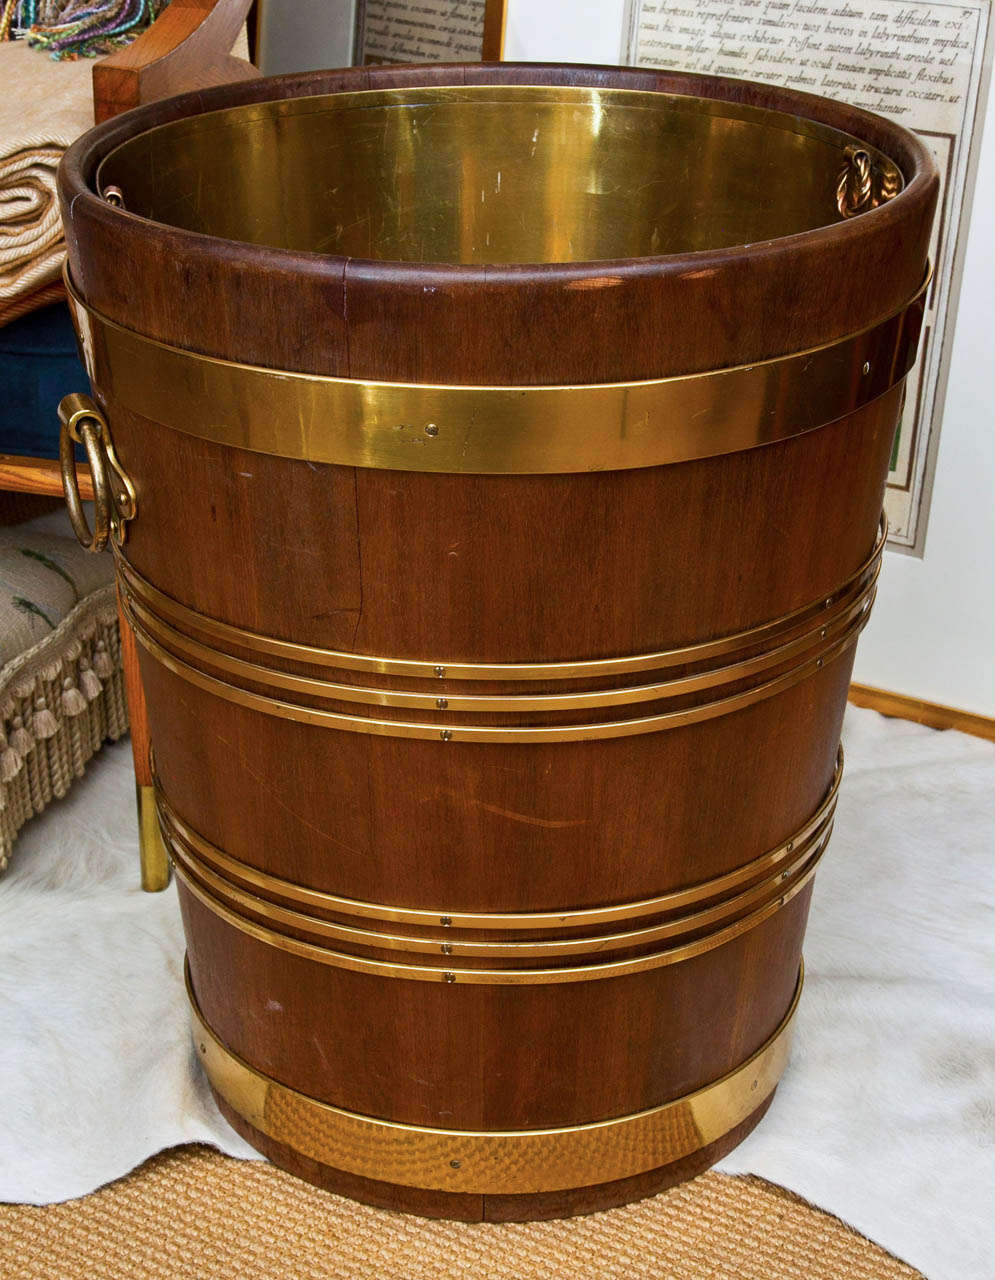 A beautifully crafted slatted wood bucket bound by solid brass rings. There are two large ring handles on either side. Within the bucket sits a liner of sheeted brass, also with handles.